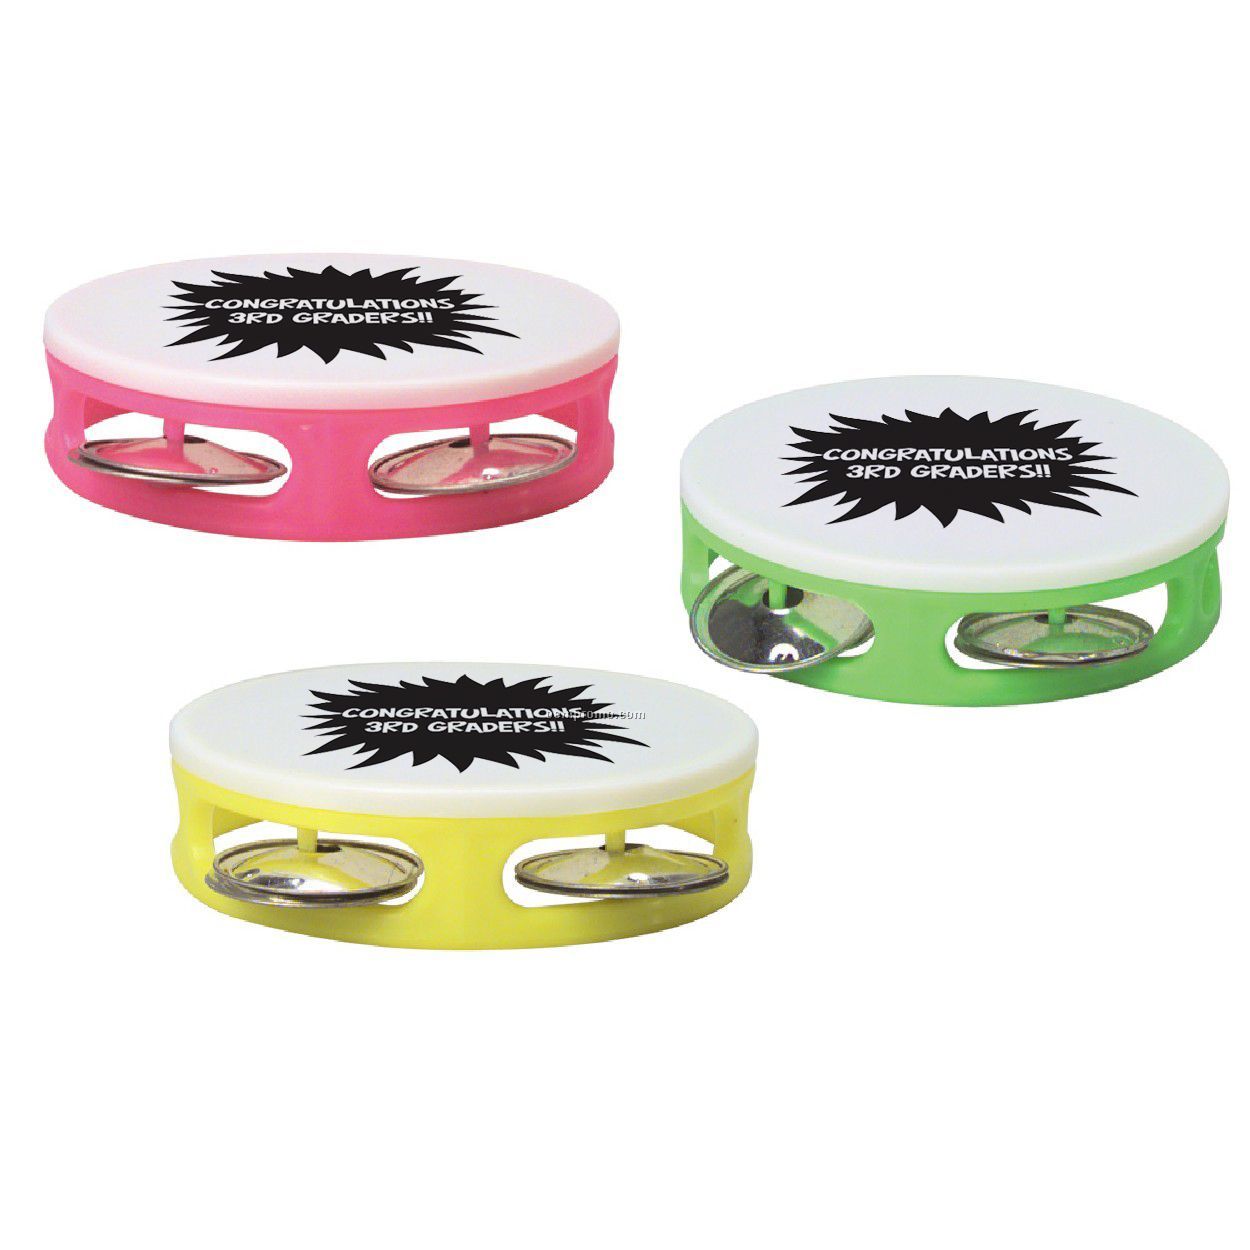 Tambourine With Neon Sides And White Top, 3 1/2"